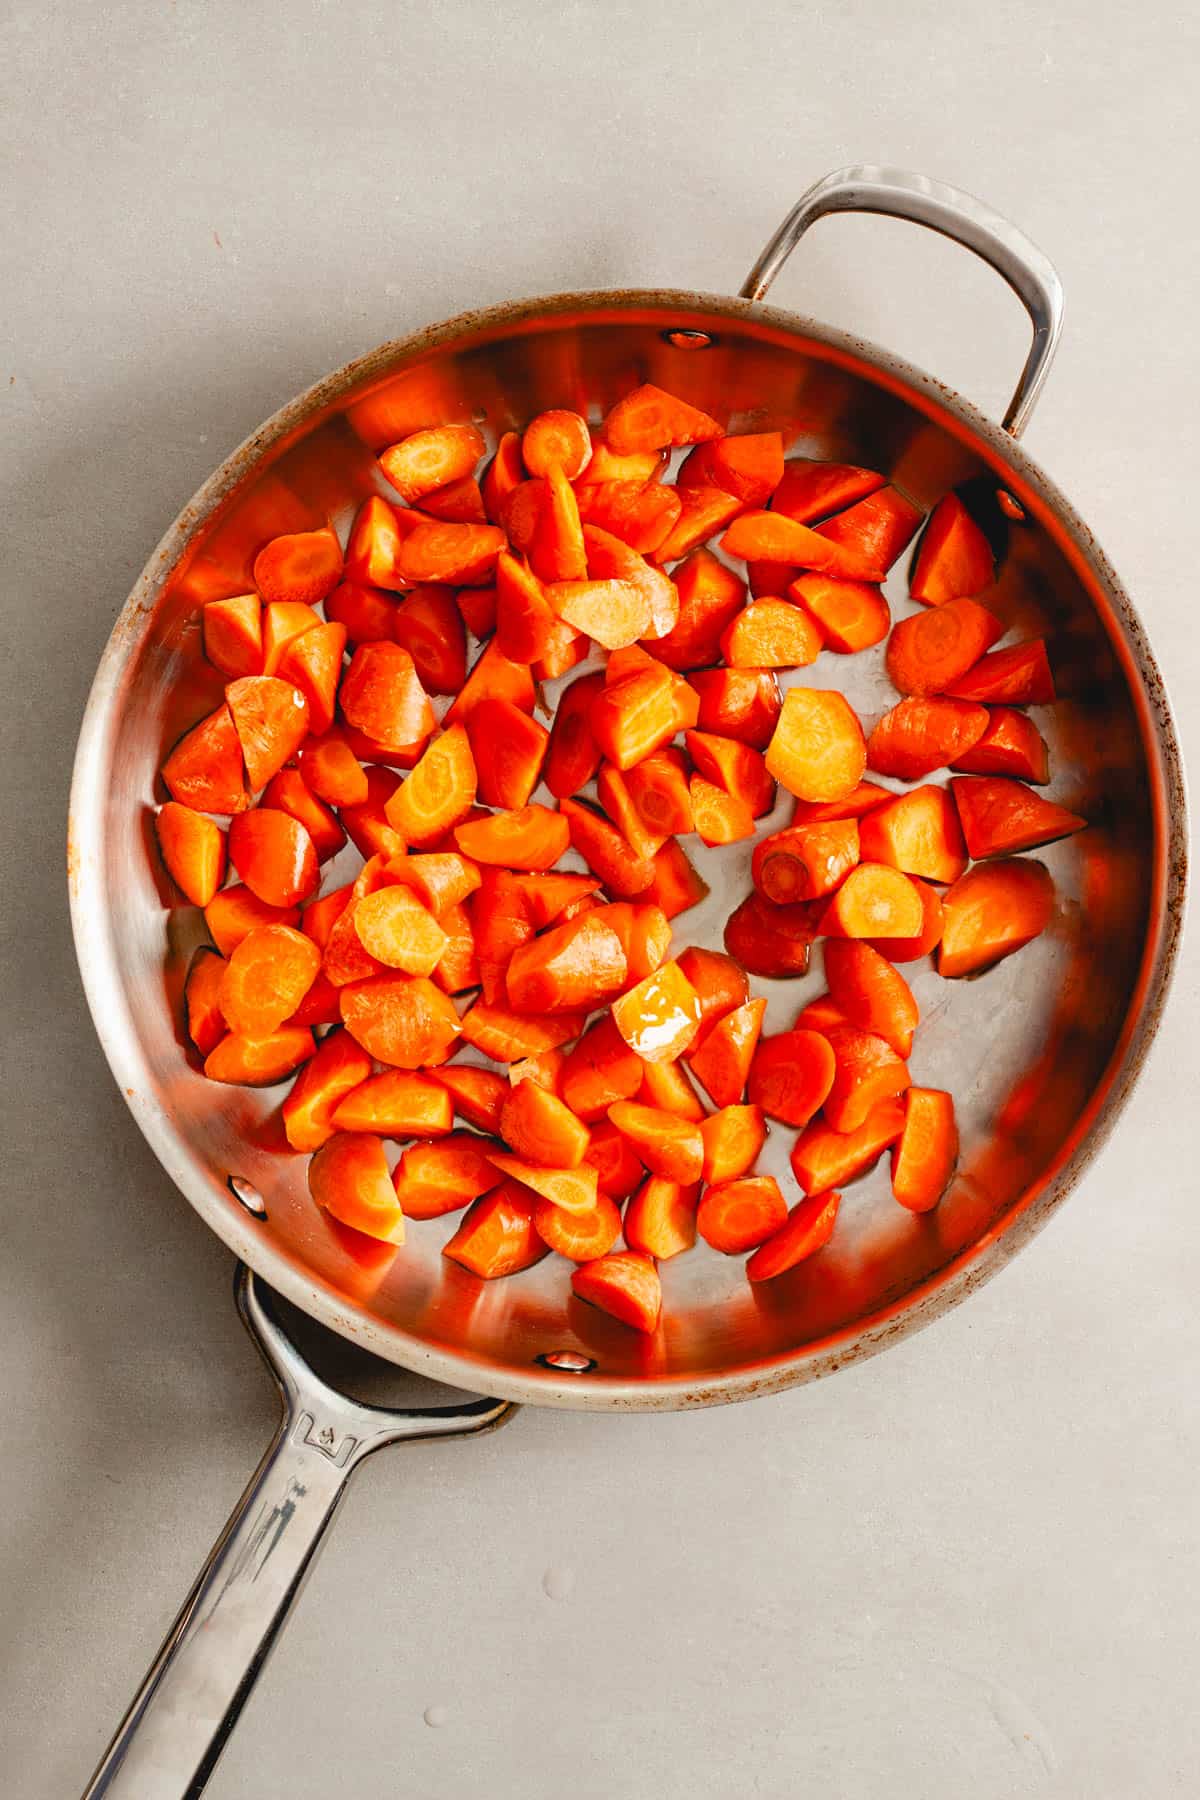 Oblong cut carrots in a large skillet with oil ready to get sauteed.